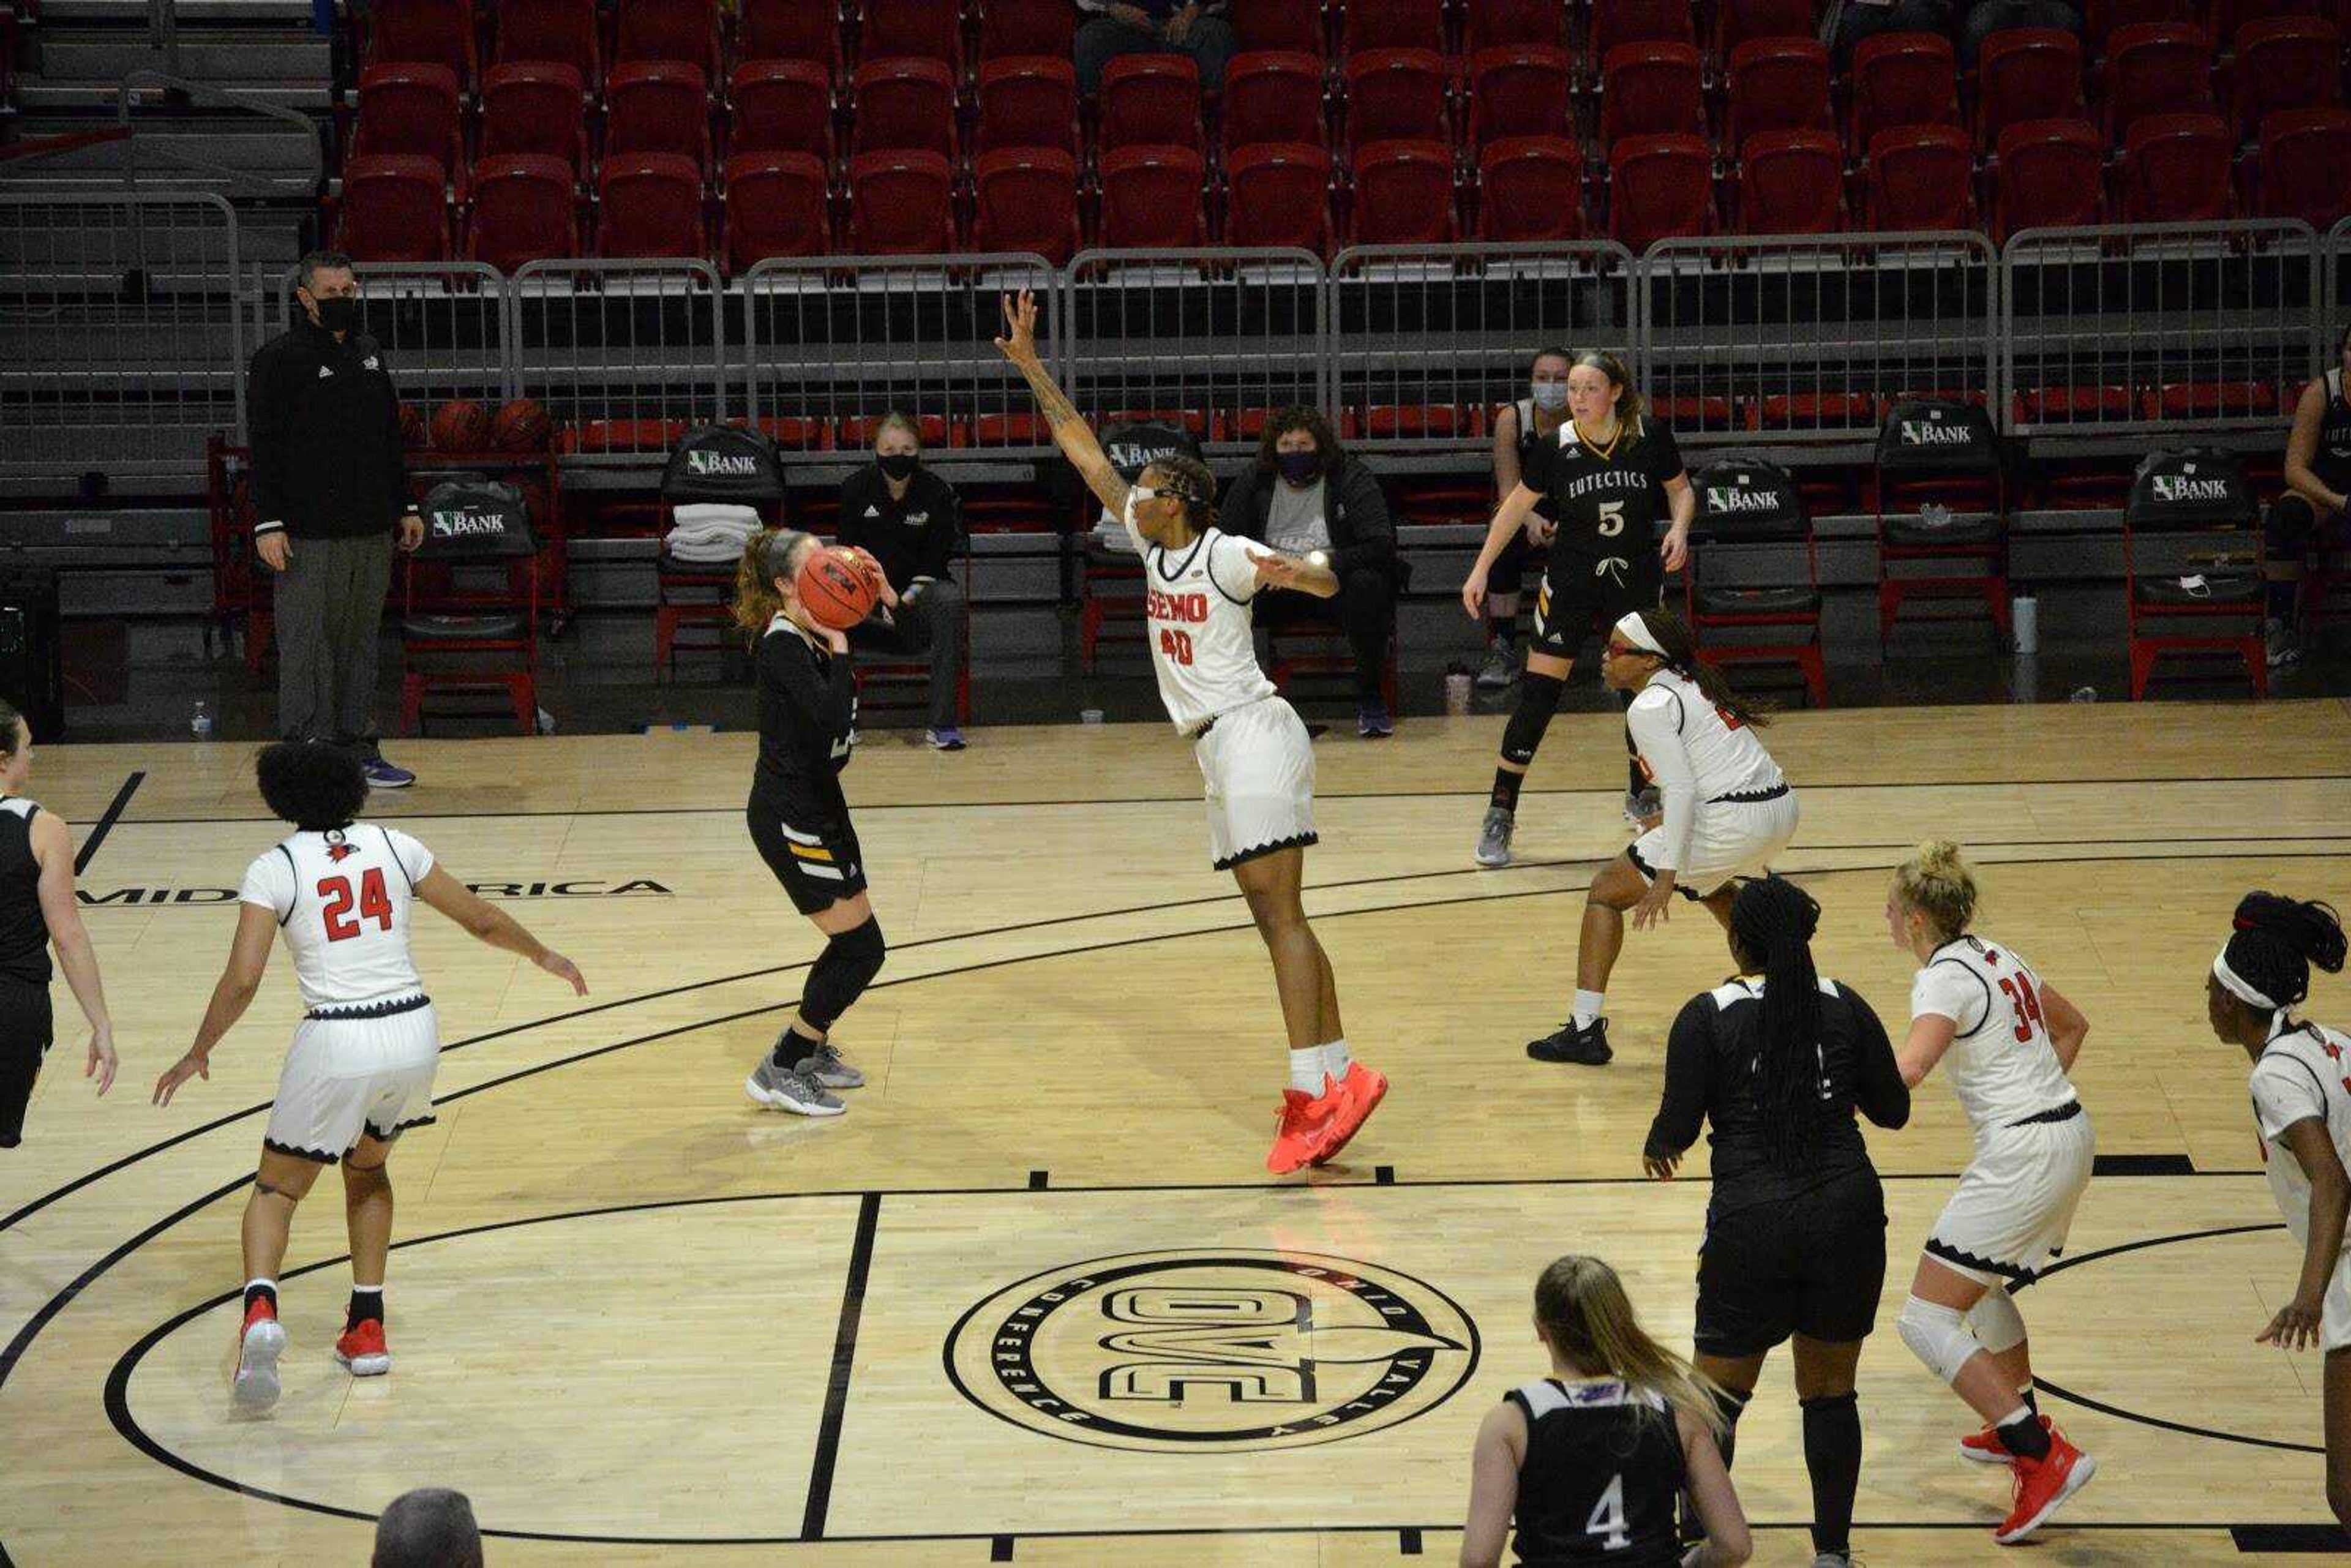 Redshirt-senior forward Latrese Saine contests a shot during the Redhawks 75-44 win on Dec. 1 against UHSP at the Show Me Center in Cape Girardeau.